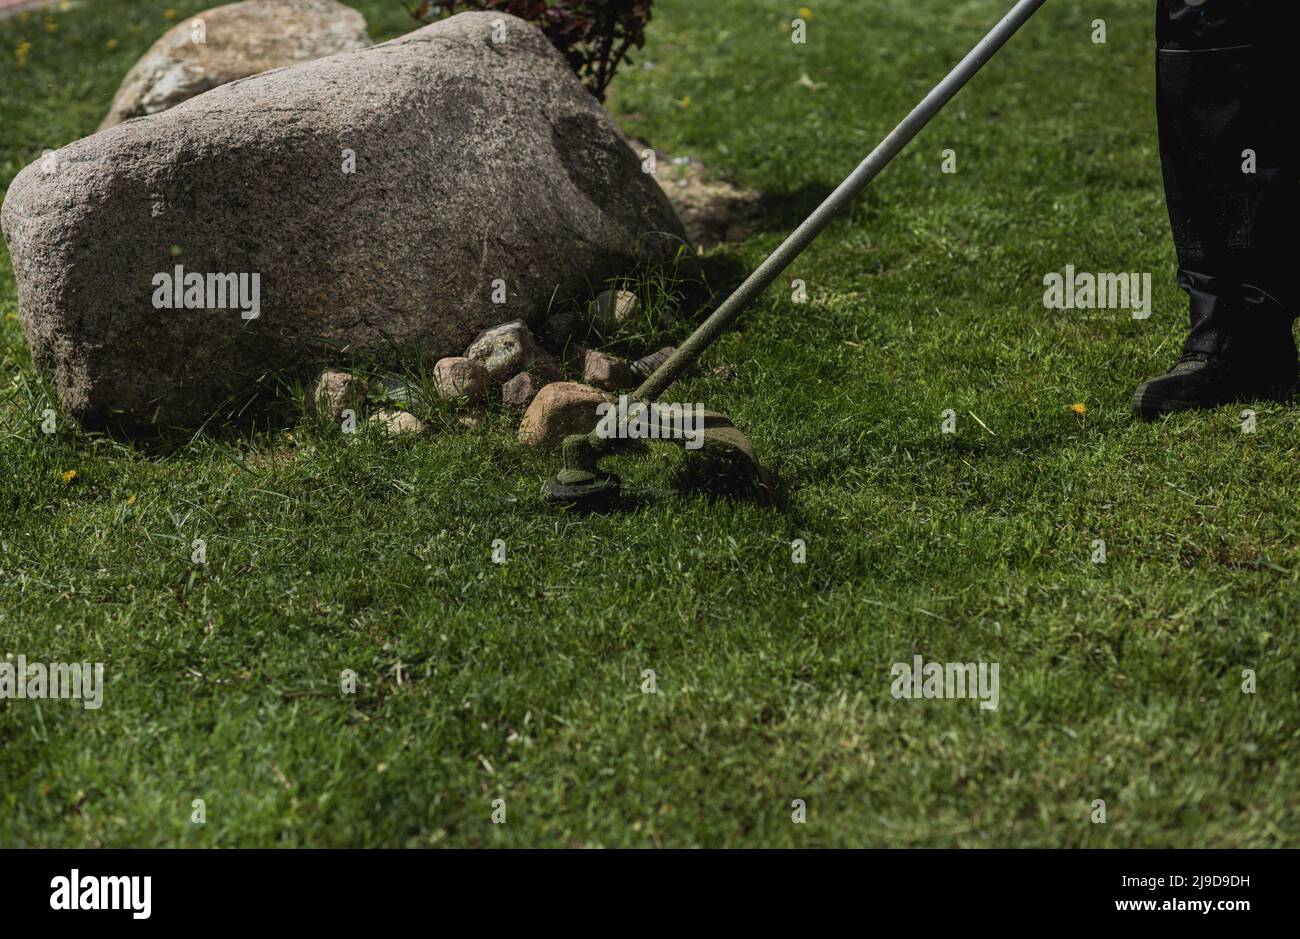 a worker mows the grass with a trimmer in the backyard. Gardening with a brushcutter Stock Photo